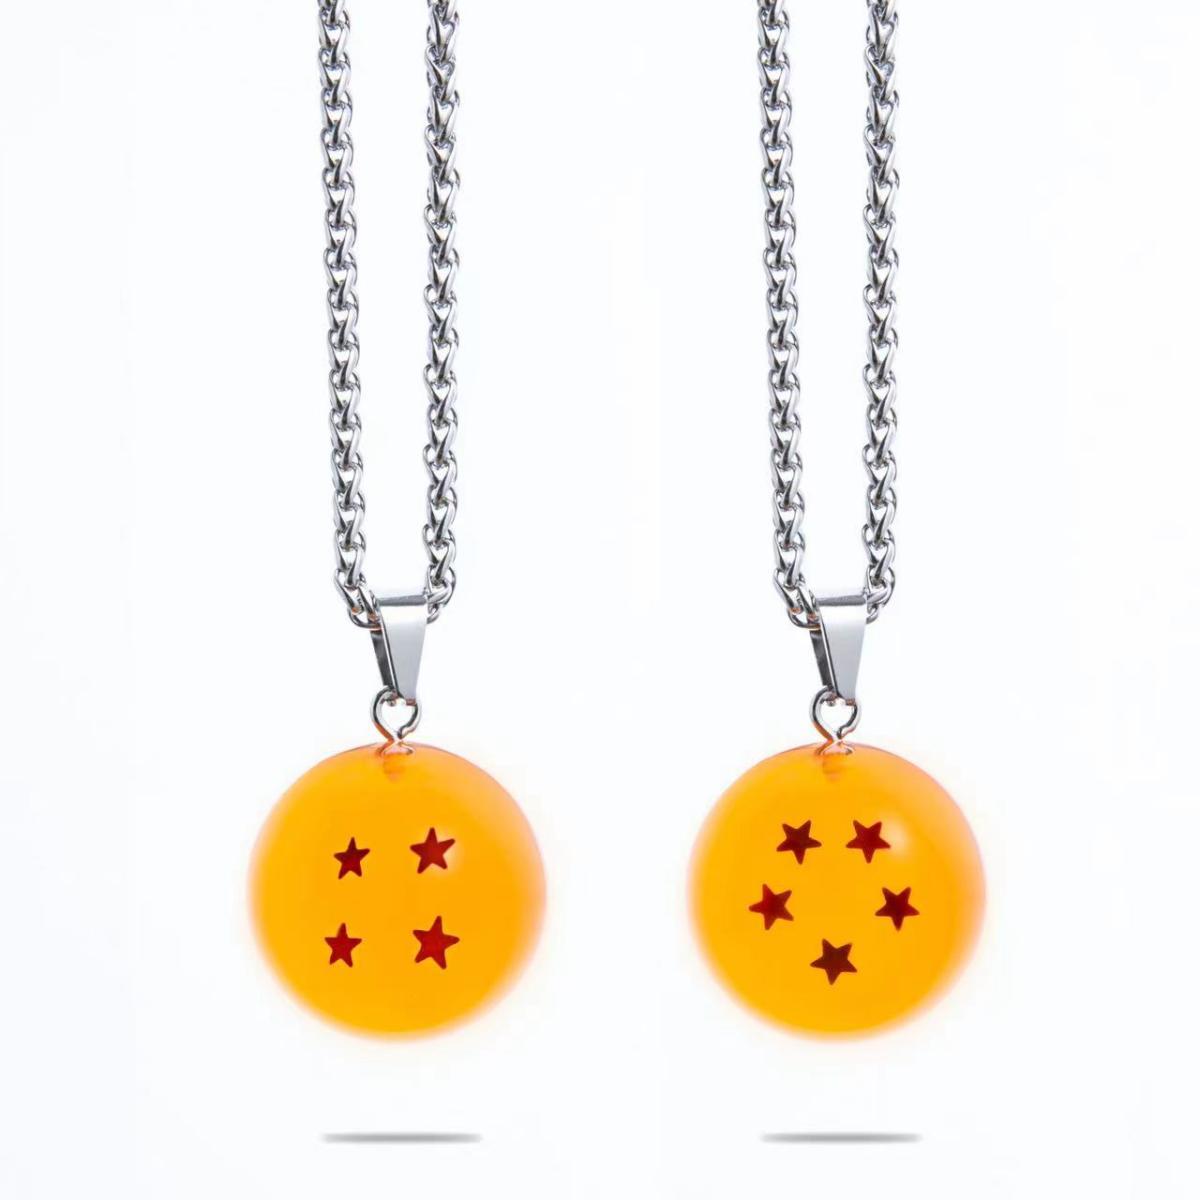 Cool necklaces and pendants related to popular anime seven Dragon Balls